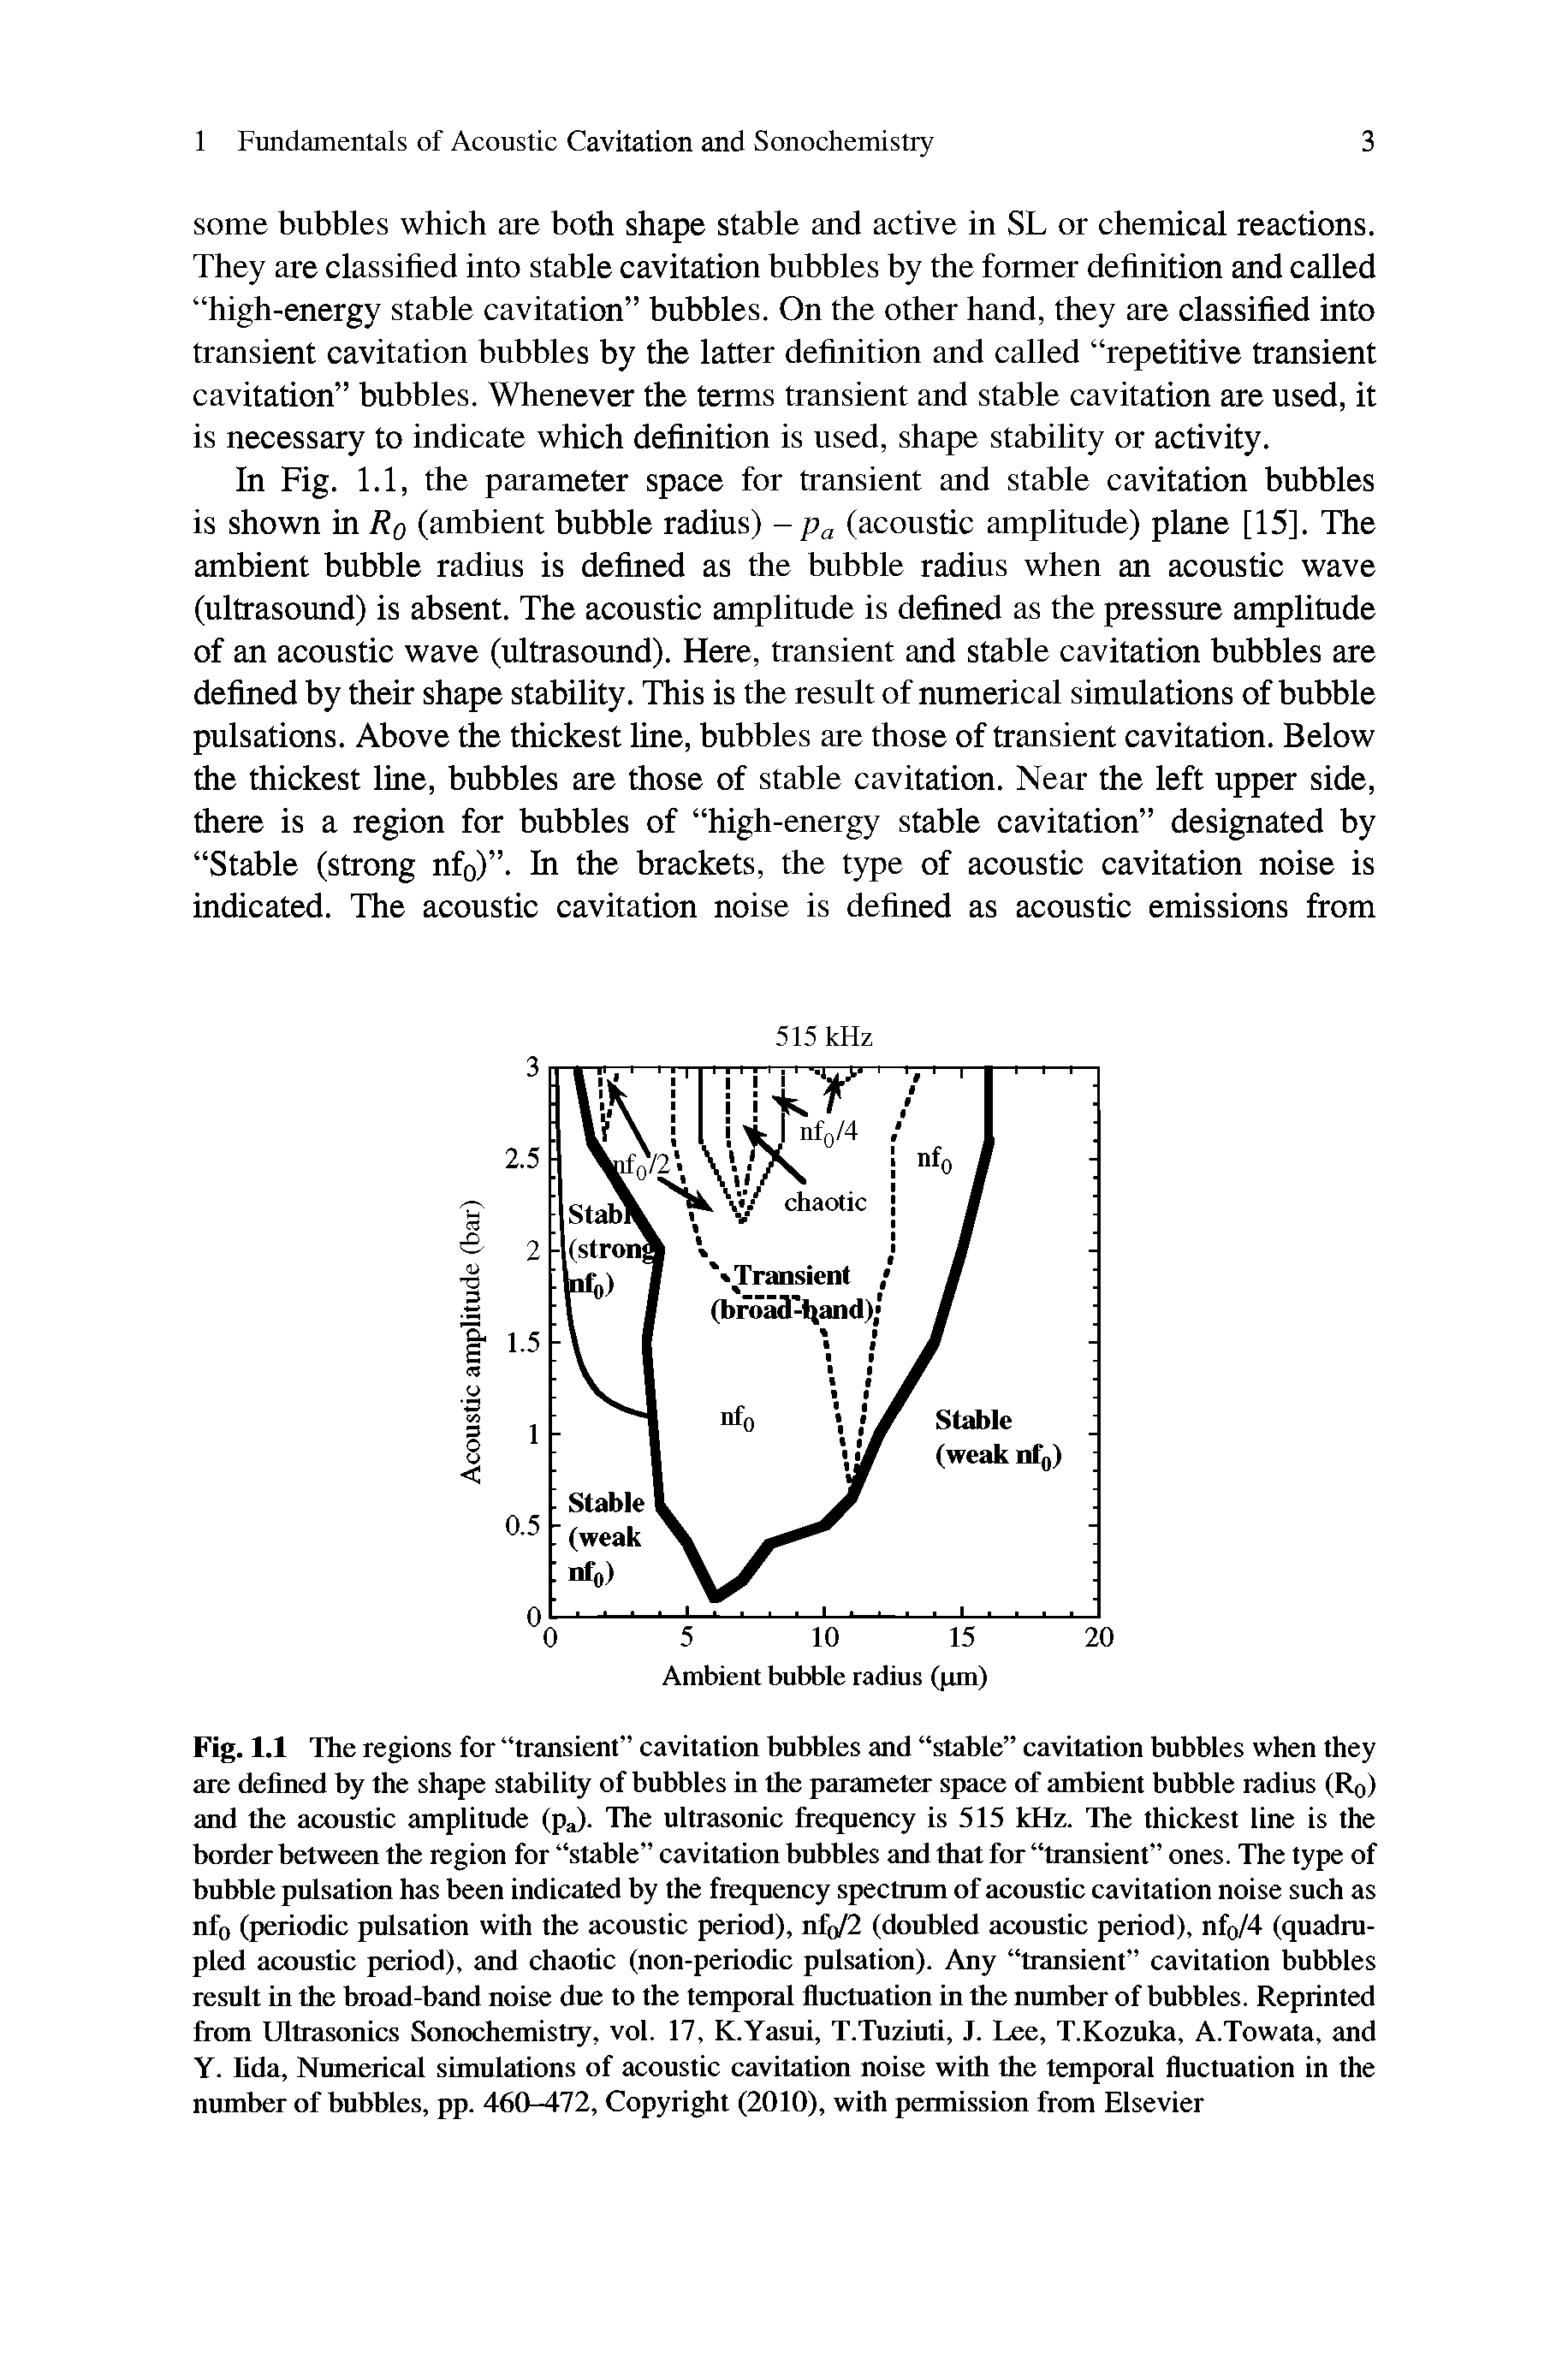 Fig. 1.1 The regions for transient cavitation bubbles and stable cavitation bubbles when they are defined by the shape stability of bubbles in the parameter space of ambient bubble radius (R0) and the acoustic amplitude (p ). The ultrasonic frequency is 515 kHz. The thickest line is the border between the region for stable cavitation bubbles and that for transient ones. The type of bubble pulsation has been indicated by the frequency spectrum of acoustic cavitation noise such as nf0 (periodic pulsation with the acoustic period), nfo/2 (doubled acoustic period), nf0/4 (quadrupled acoustic period), and chaotic (non-periodic pulsation). Any transient cavitation bubbles result in the broad-band noise due to the temporal fluctuation in the number of bubbles. Reprinted from Ultrasonics Sonochemistry, vol. 17, K.Yasui, T.Tuziuti, J. Lee, T.Kozuka, A.Towata, and Y. Iida, Numerical simulations of acoustic cavitation noise with the temporal fluctuation in the number of bubbles, pp. 460-472, Copyright (2010), with permission from Elsevier...